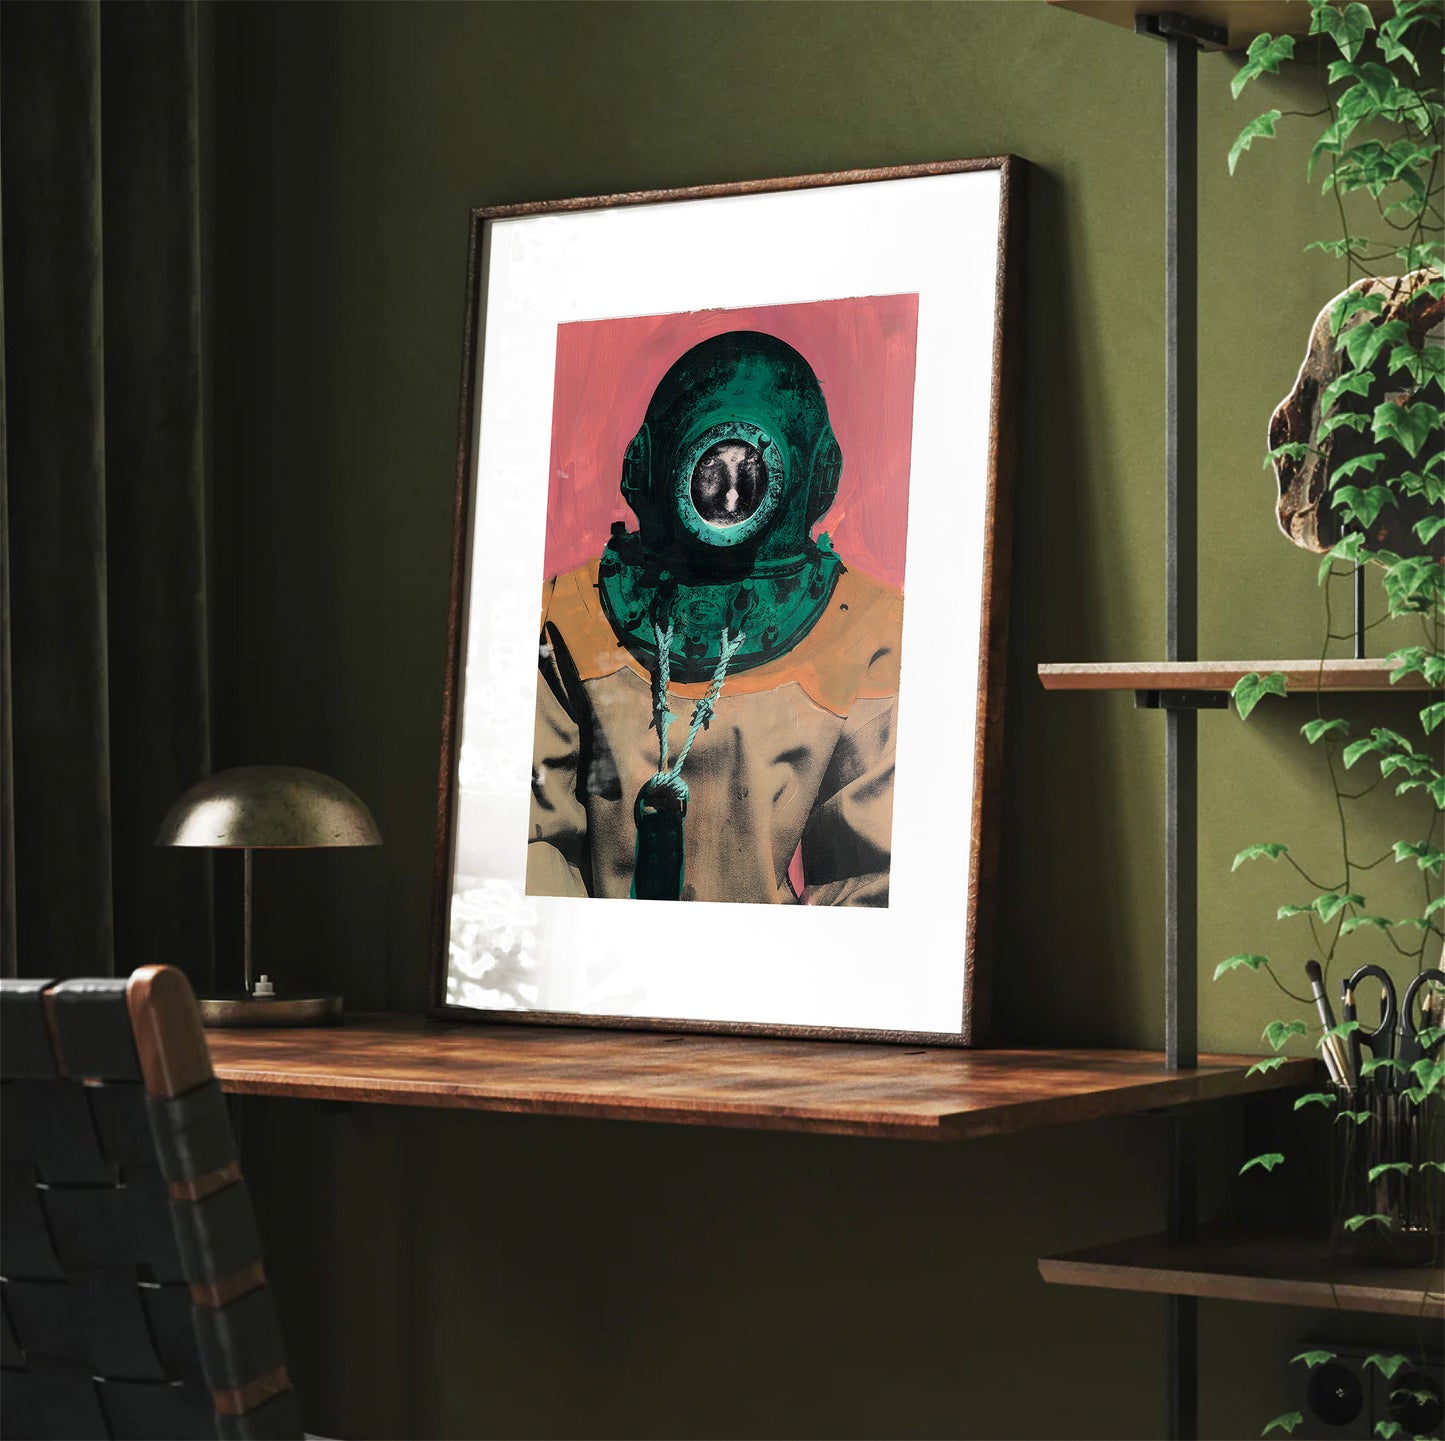 Painting Pop Art Wall Art from Greece | Pink & Green sponge diver from Kalymnos island, by George Tatakis - Framed Poster